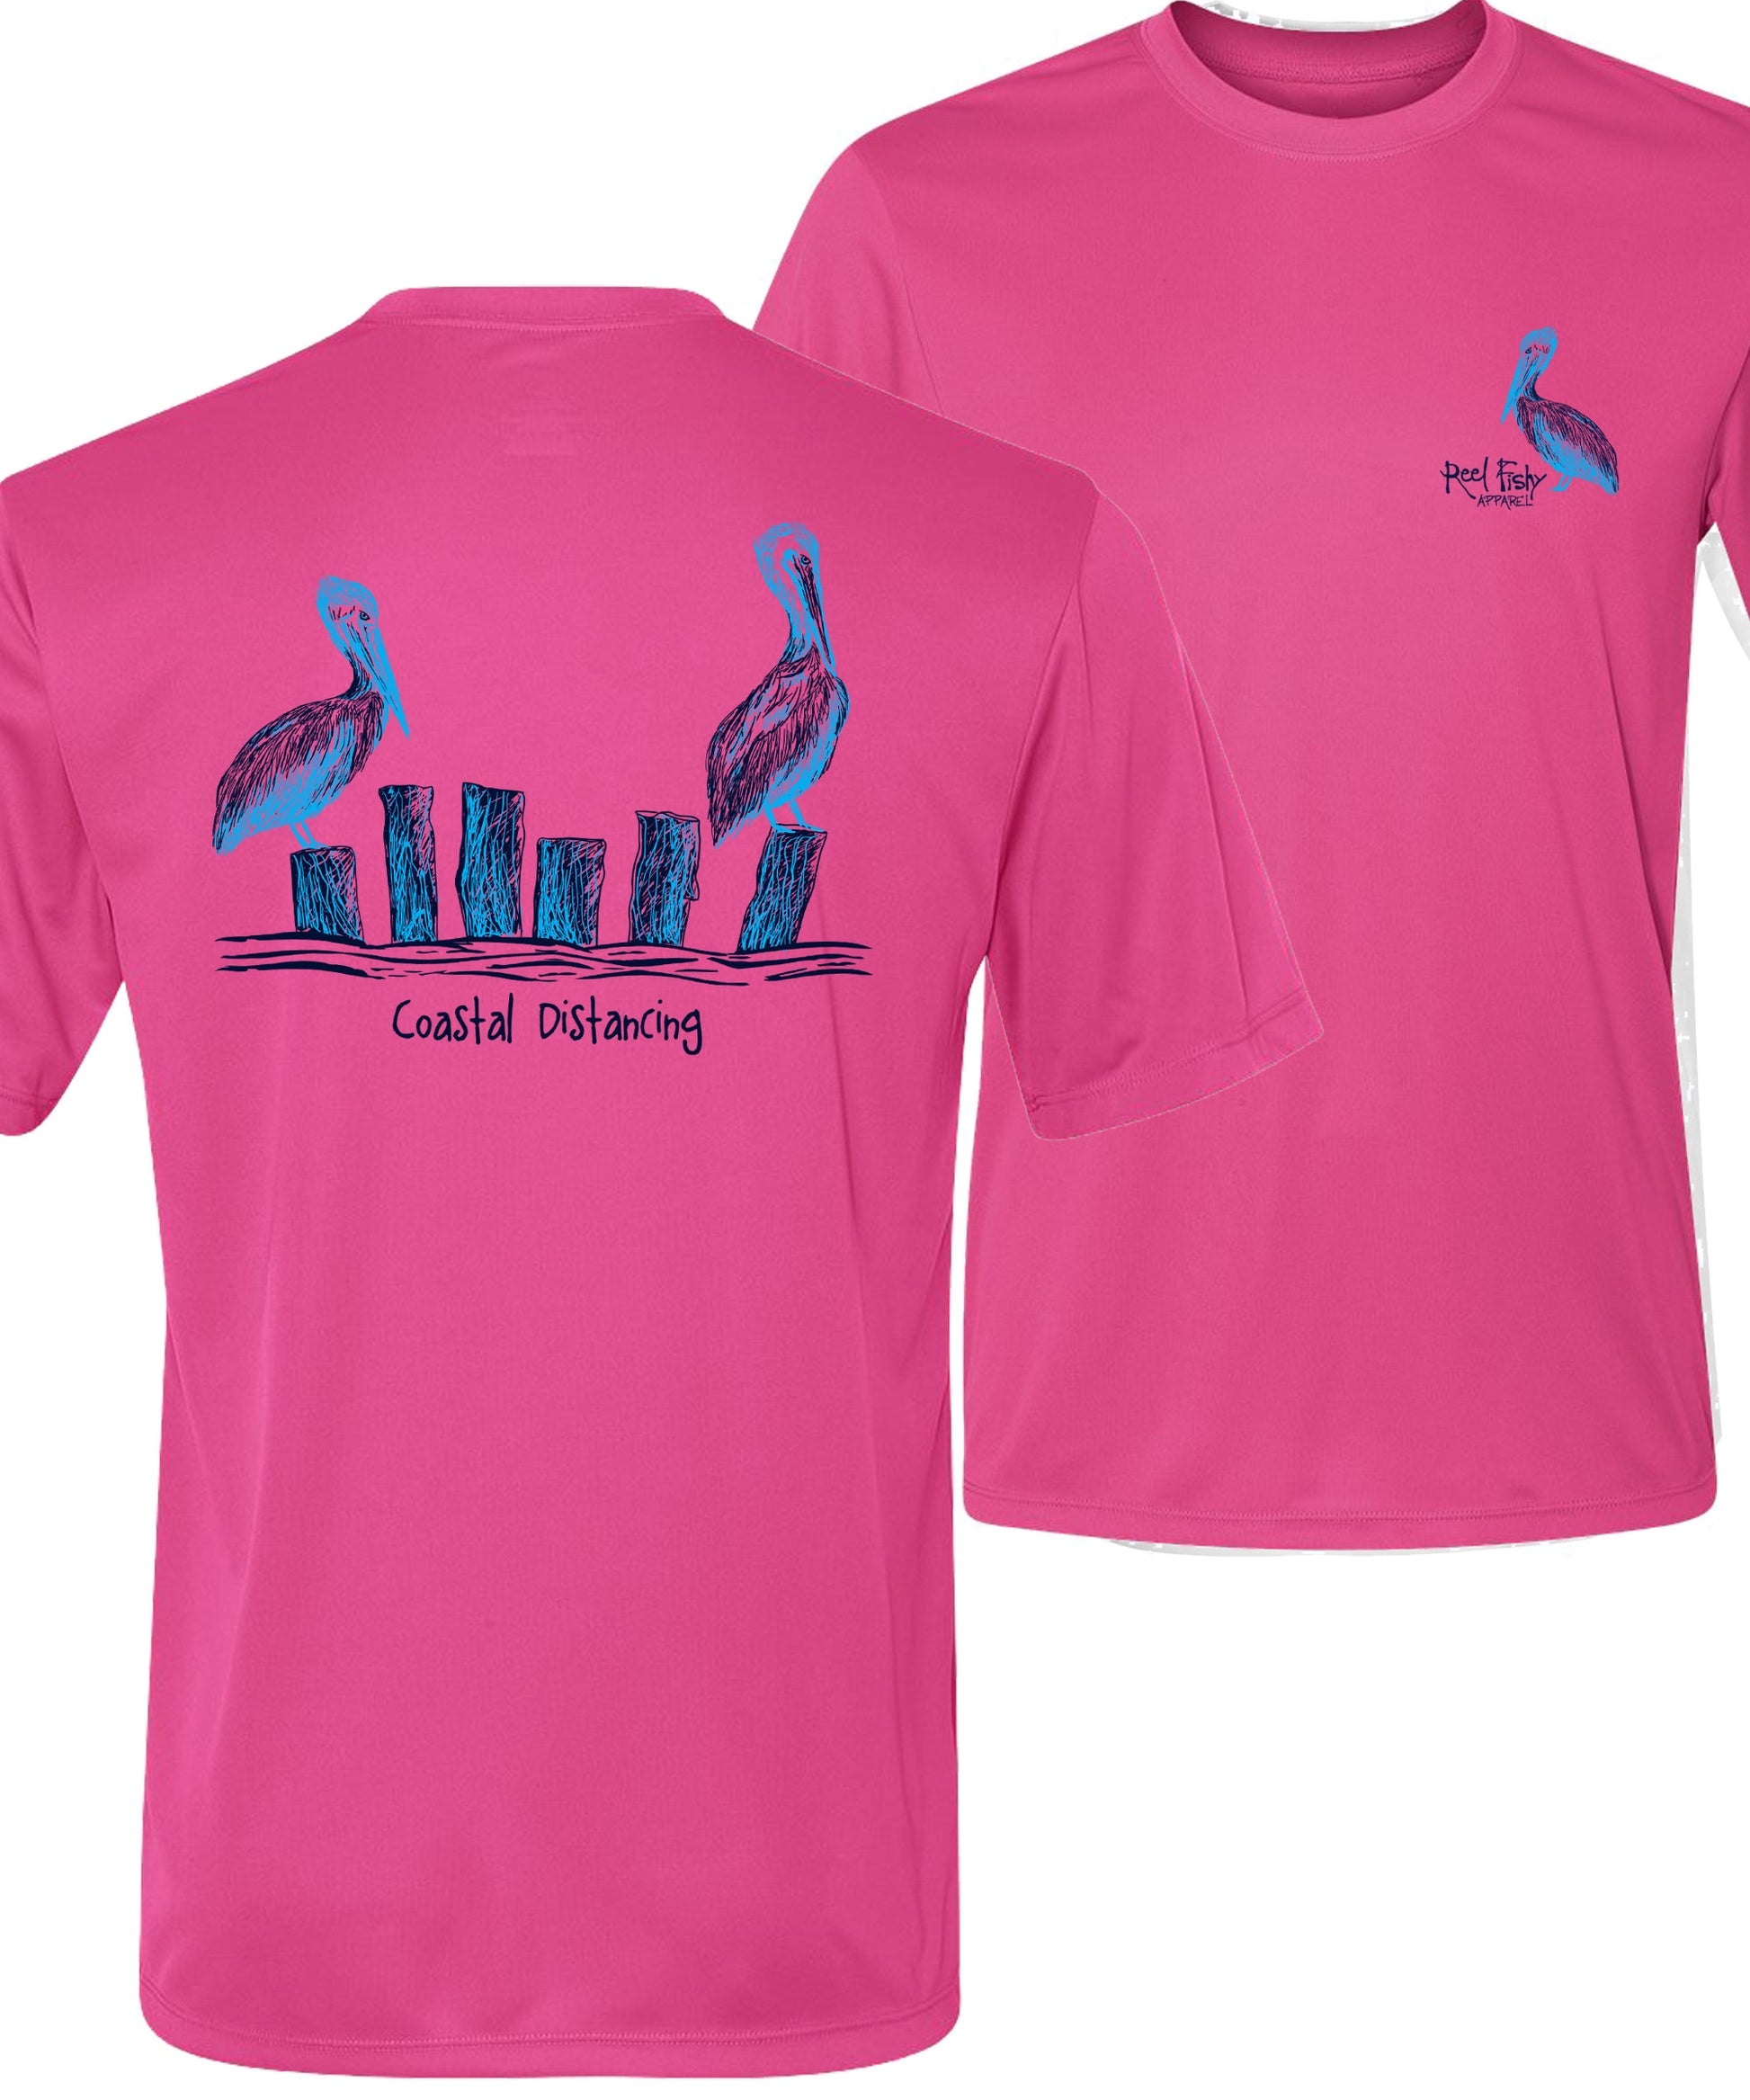 Pelicans Coastal Distancing Performance Dry-Fit 50+ UPF Sun Protection Shirts XL / Pink S/S - unisex